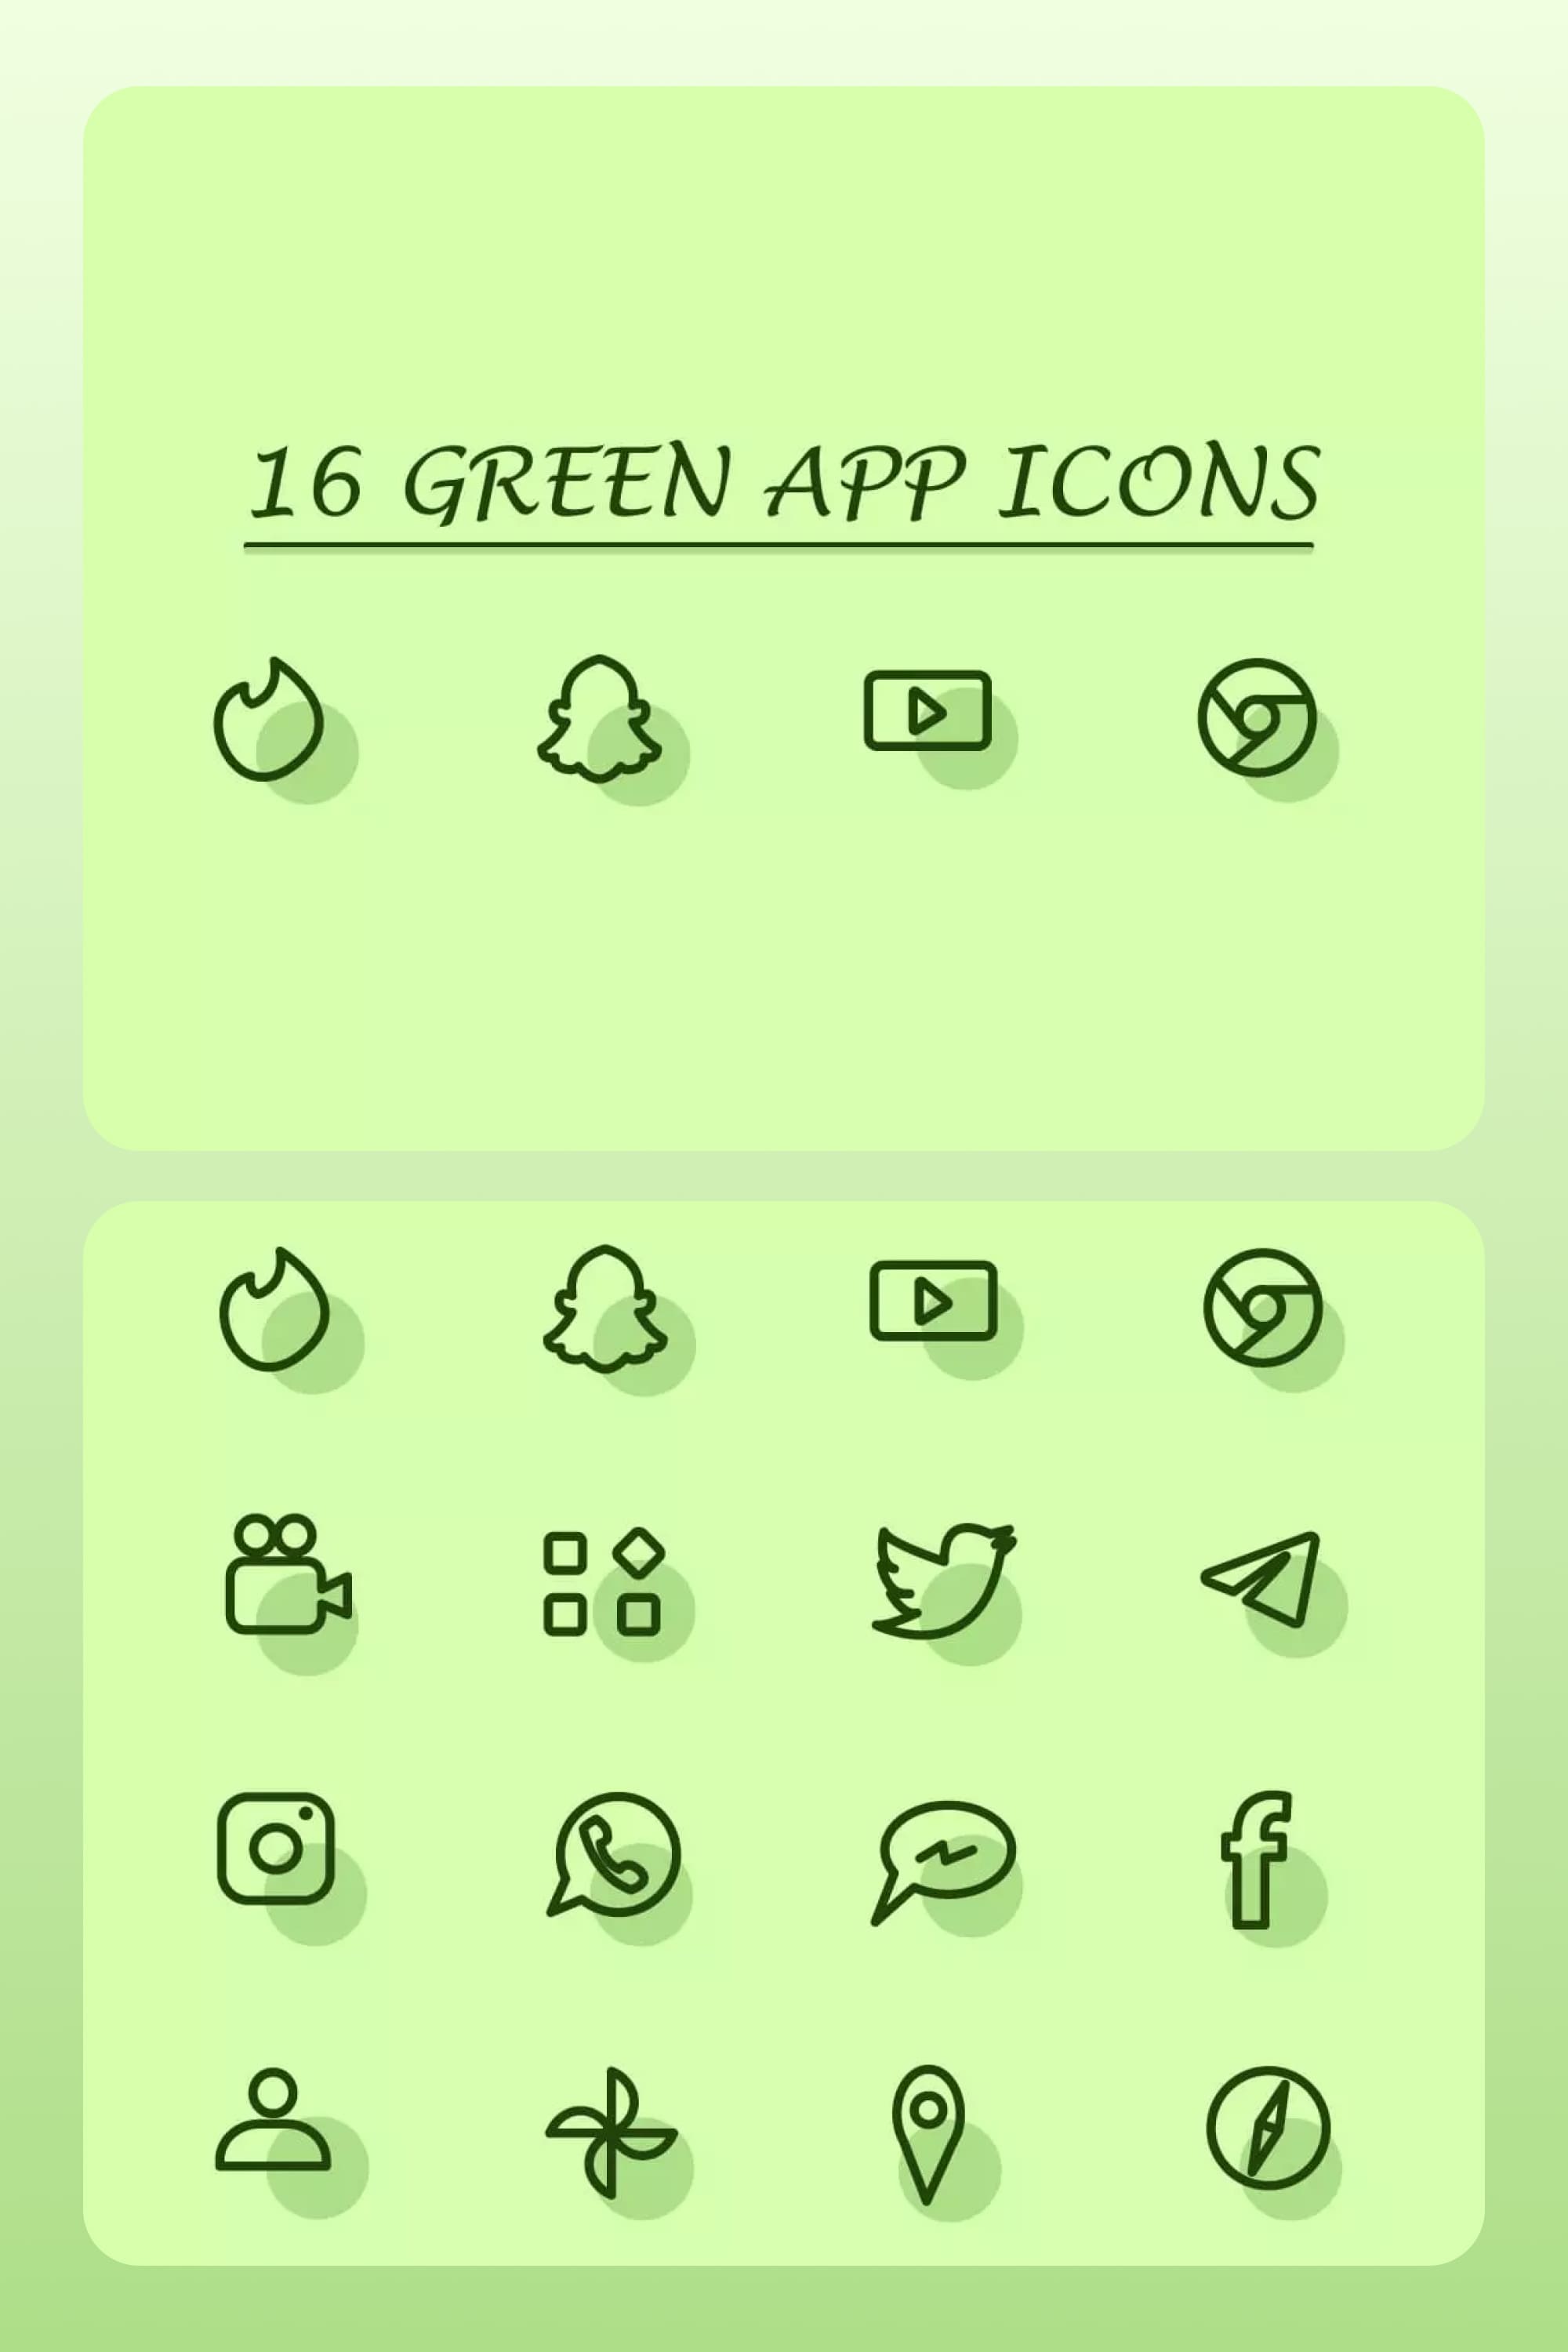 Green icons for applications on a green background.